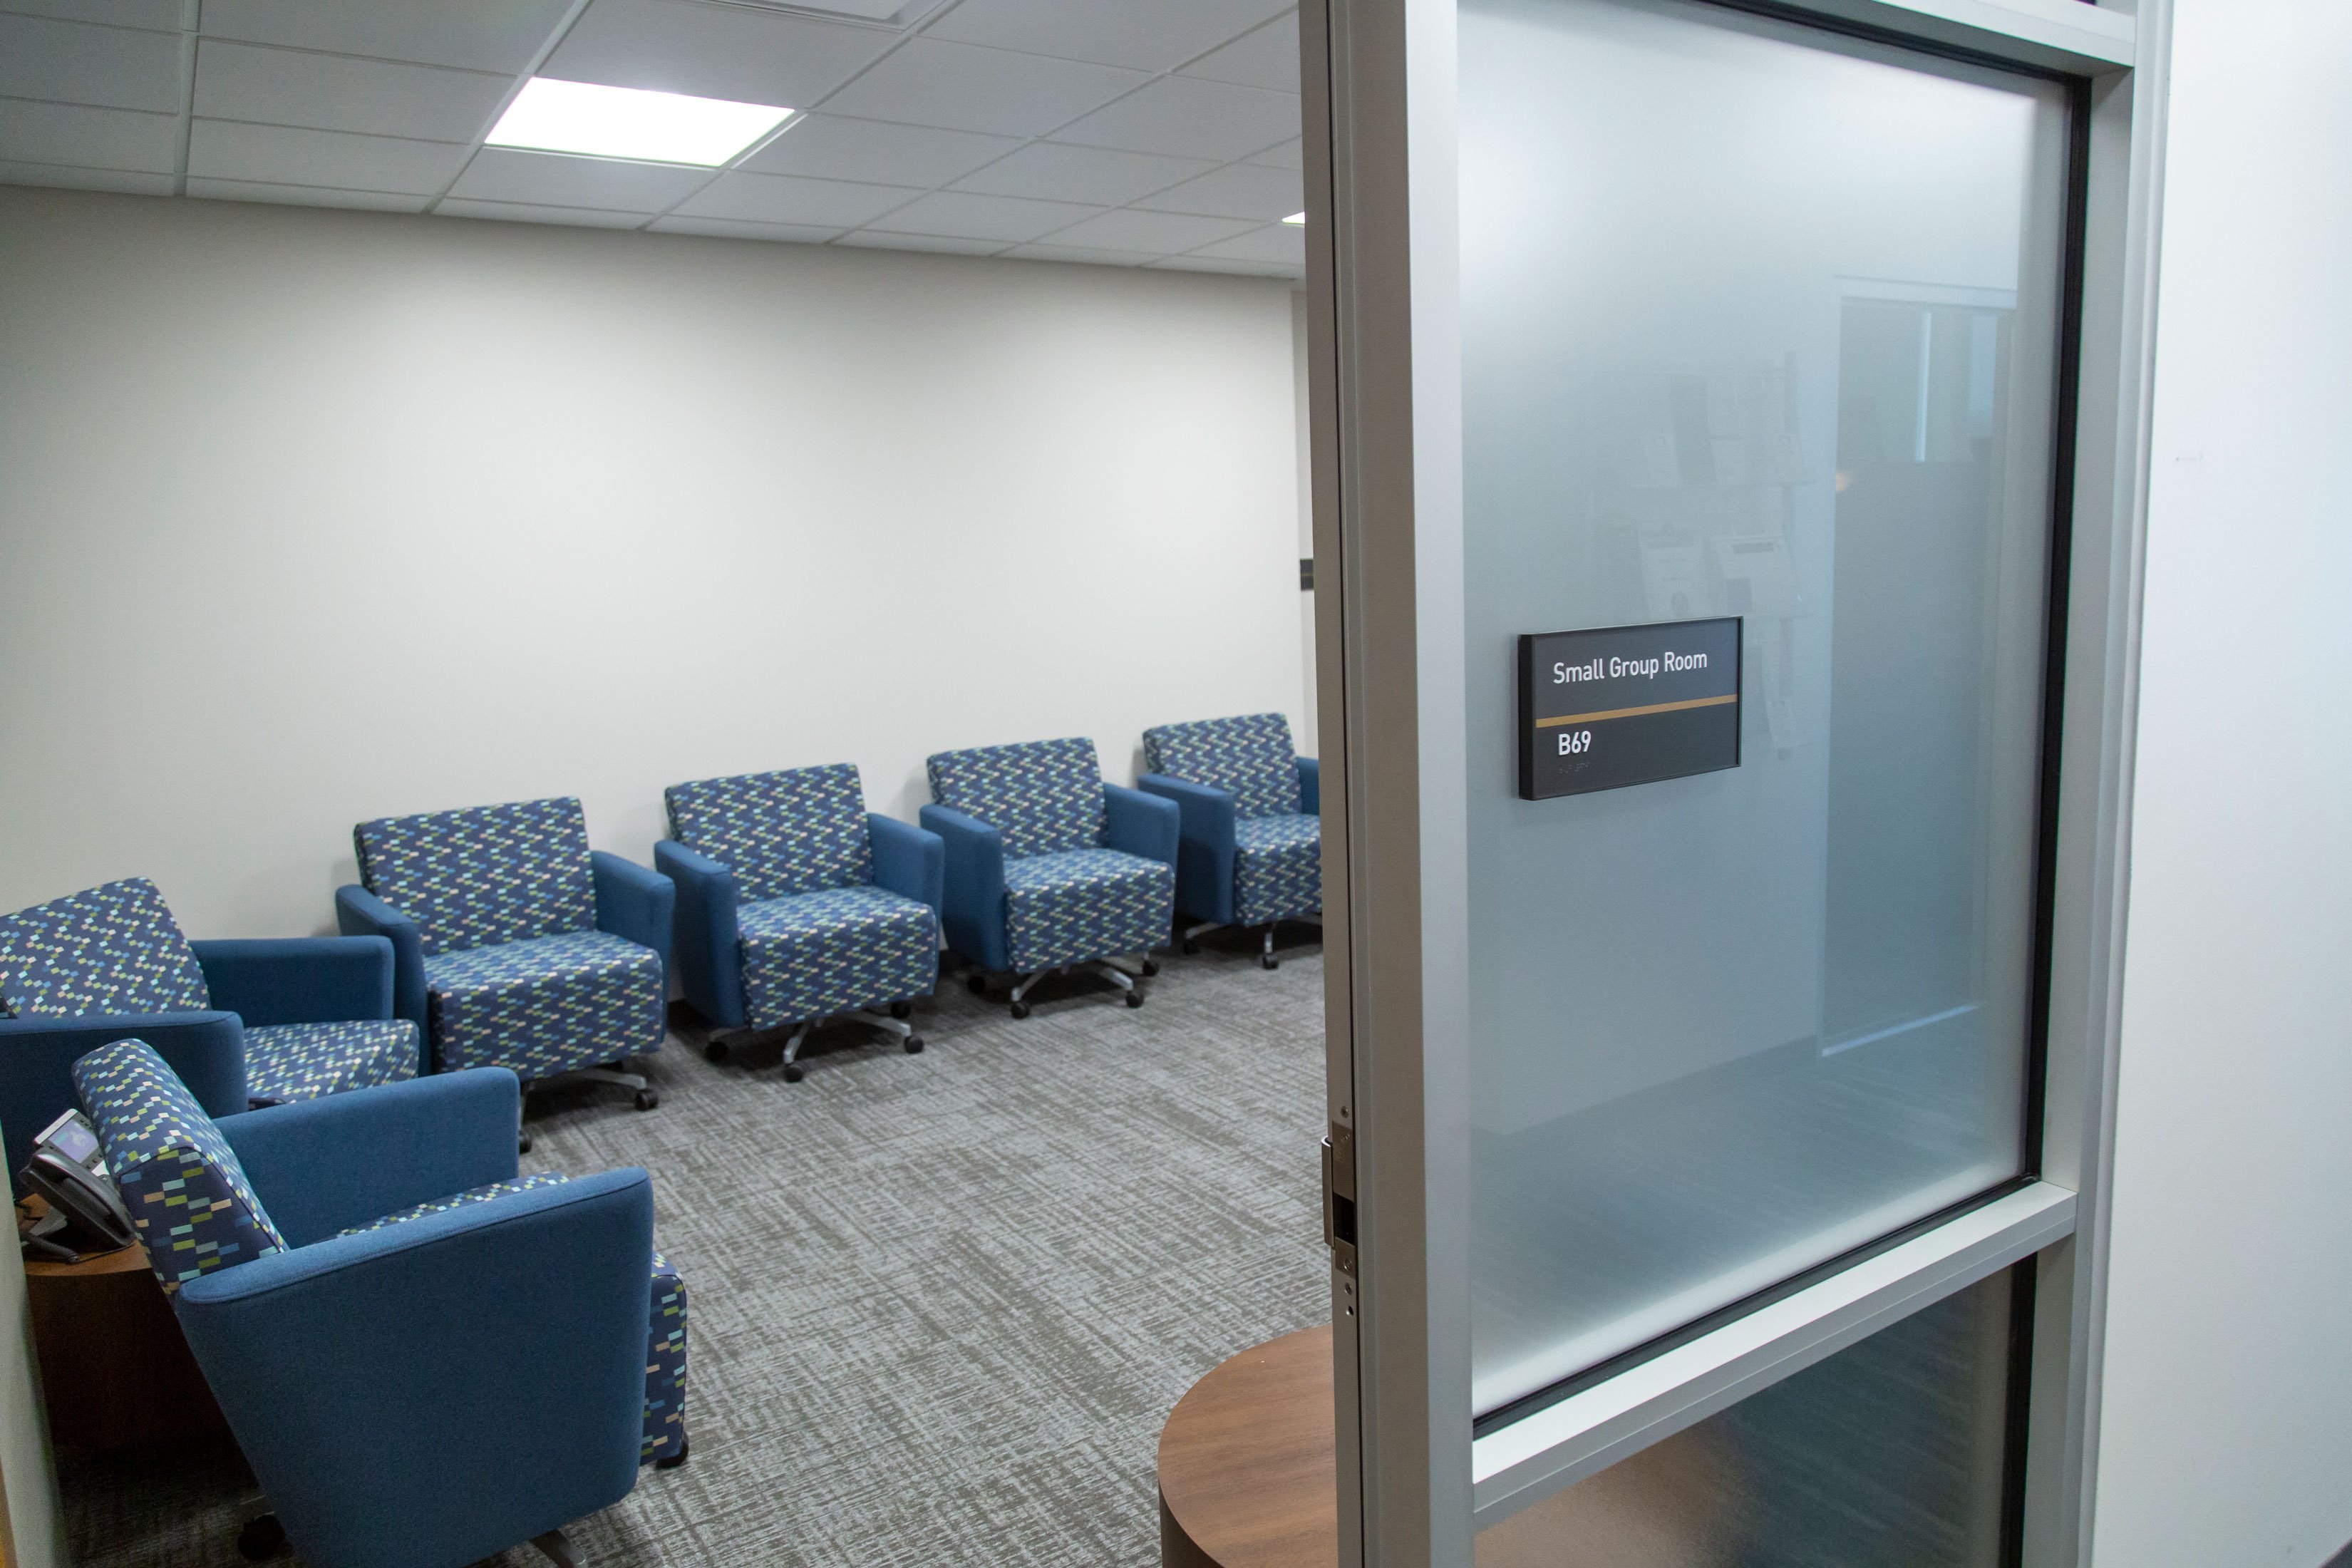 Looking into the Small Group Room through the doorway, with the room name visible besides the doorjamb. Inside, there are many comfortable chairs.